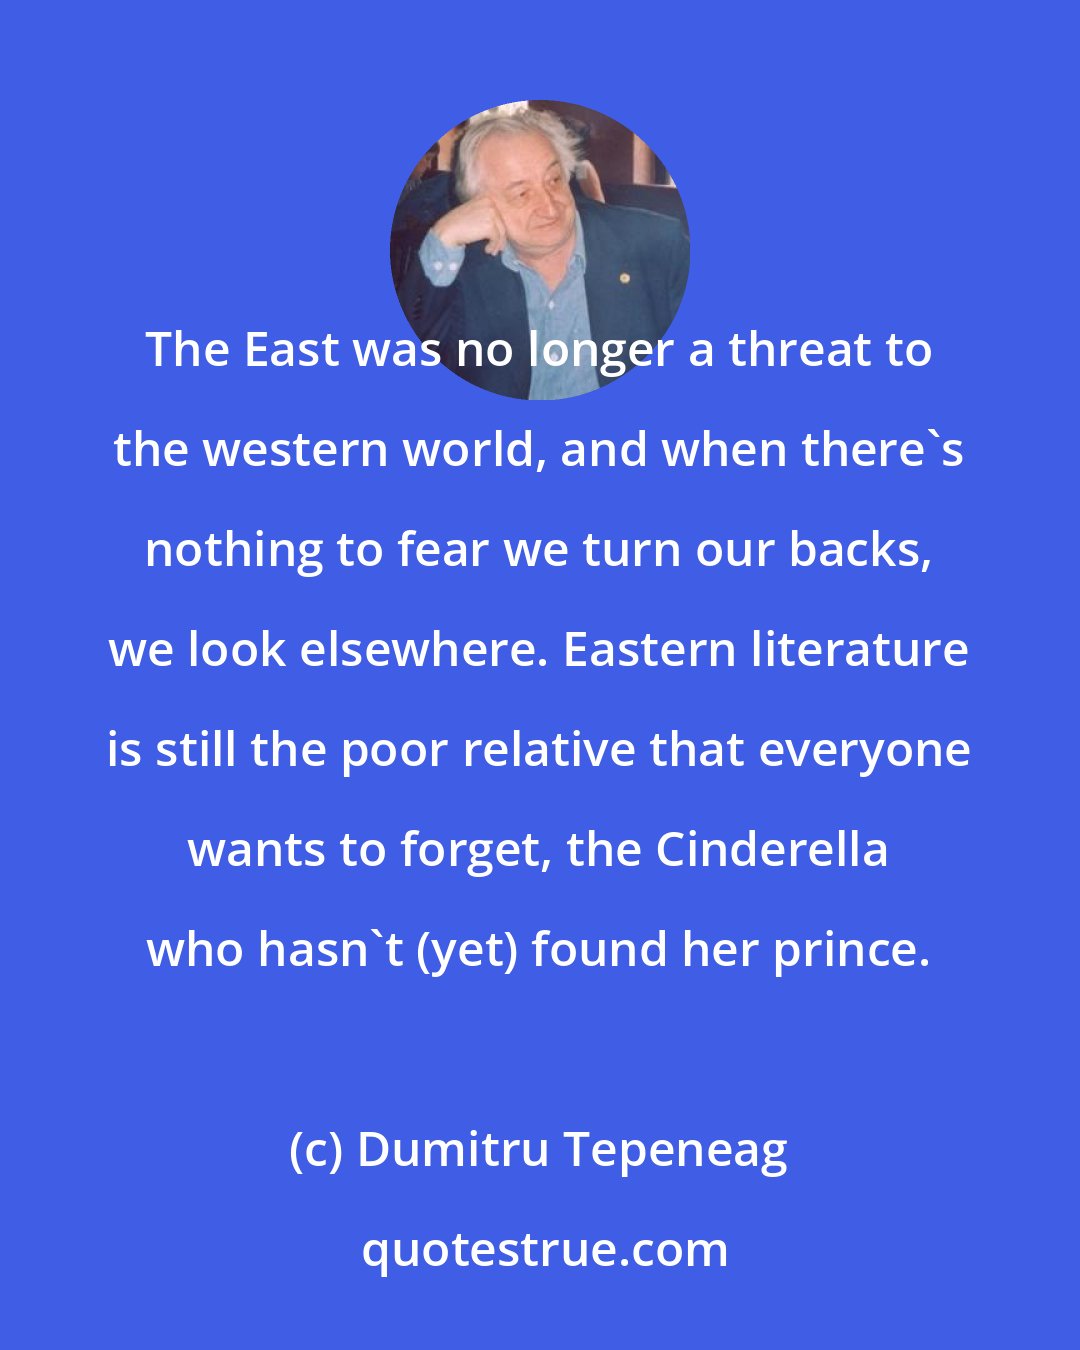 Dumitru Tepeneag: The East was no longer a threat to the western world, and when there's nothing to fear we turn our backs, we look elsewhere. Eastern literature is still the poor relative that everyone wants to forget, the Cinderella who hasn't (yet) found her prince.